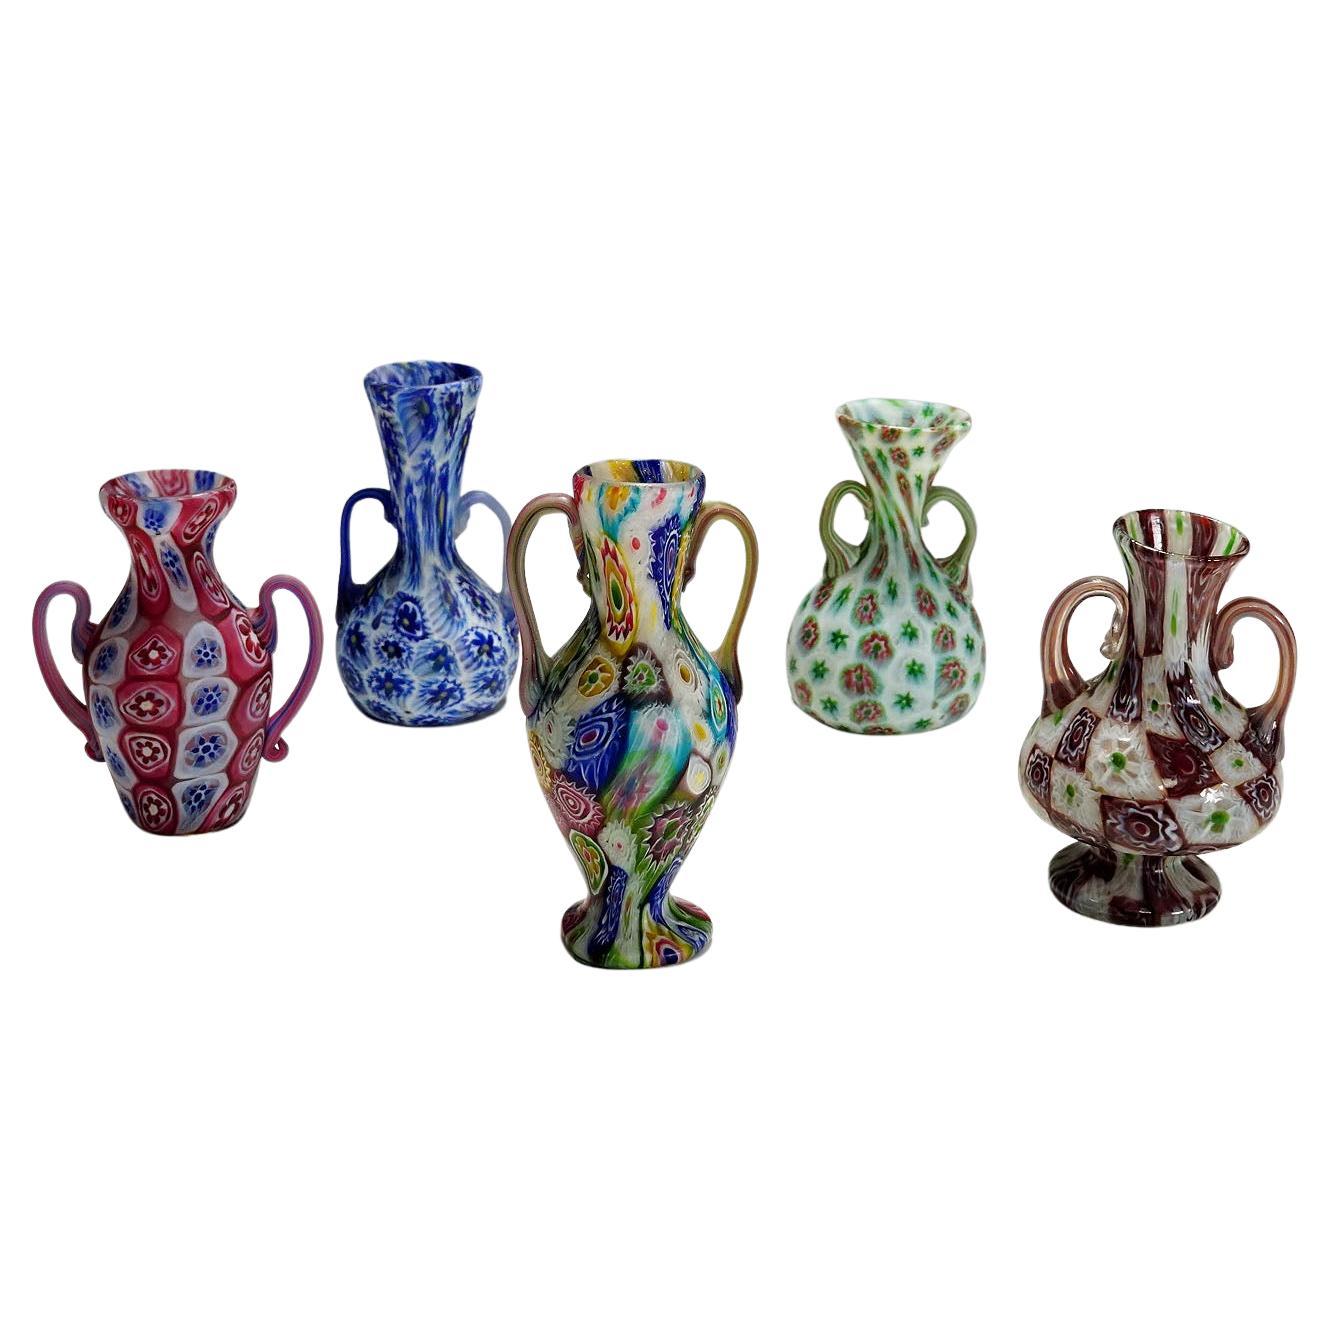 Set of Handeled Millefiori Vases by Fratelli Toso, Murano circa 1910 For Sale